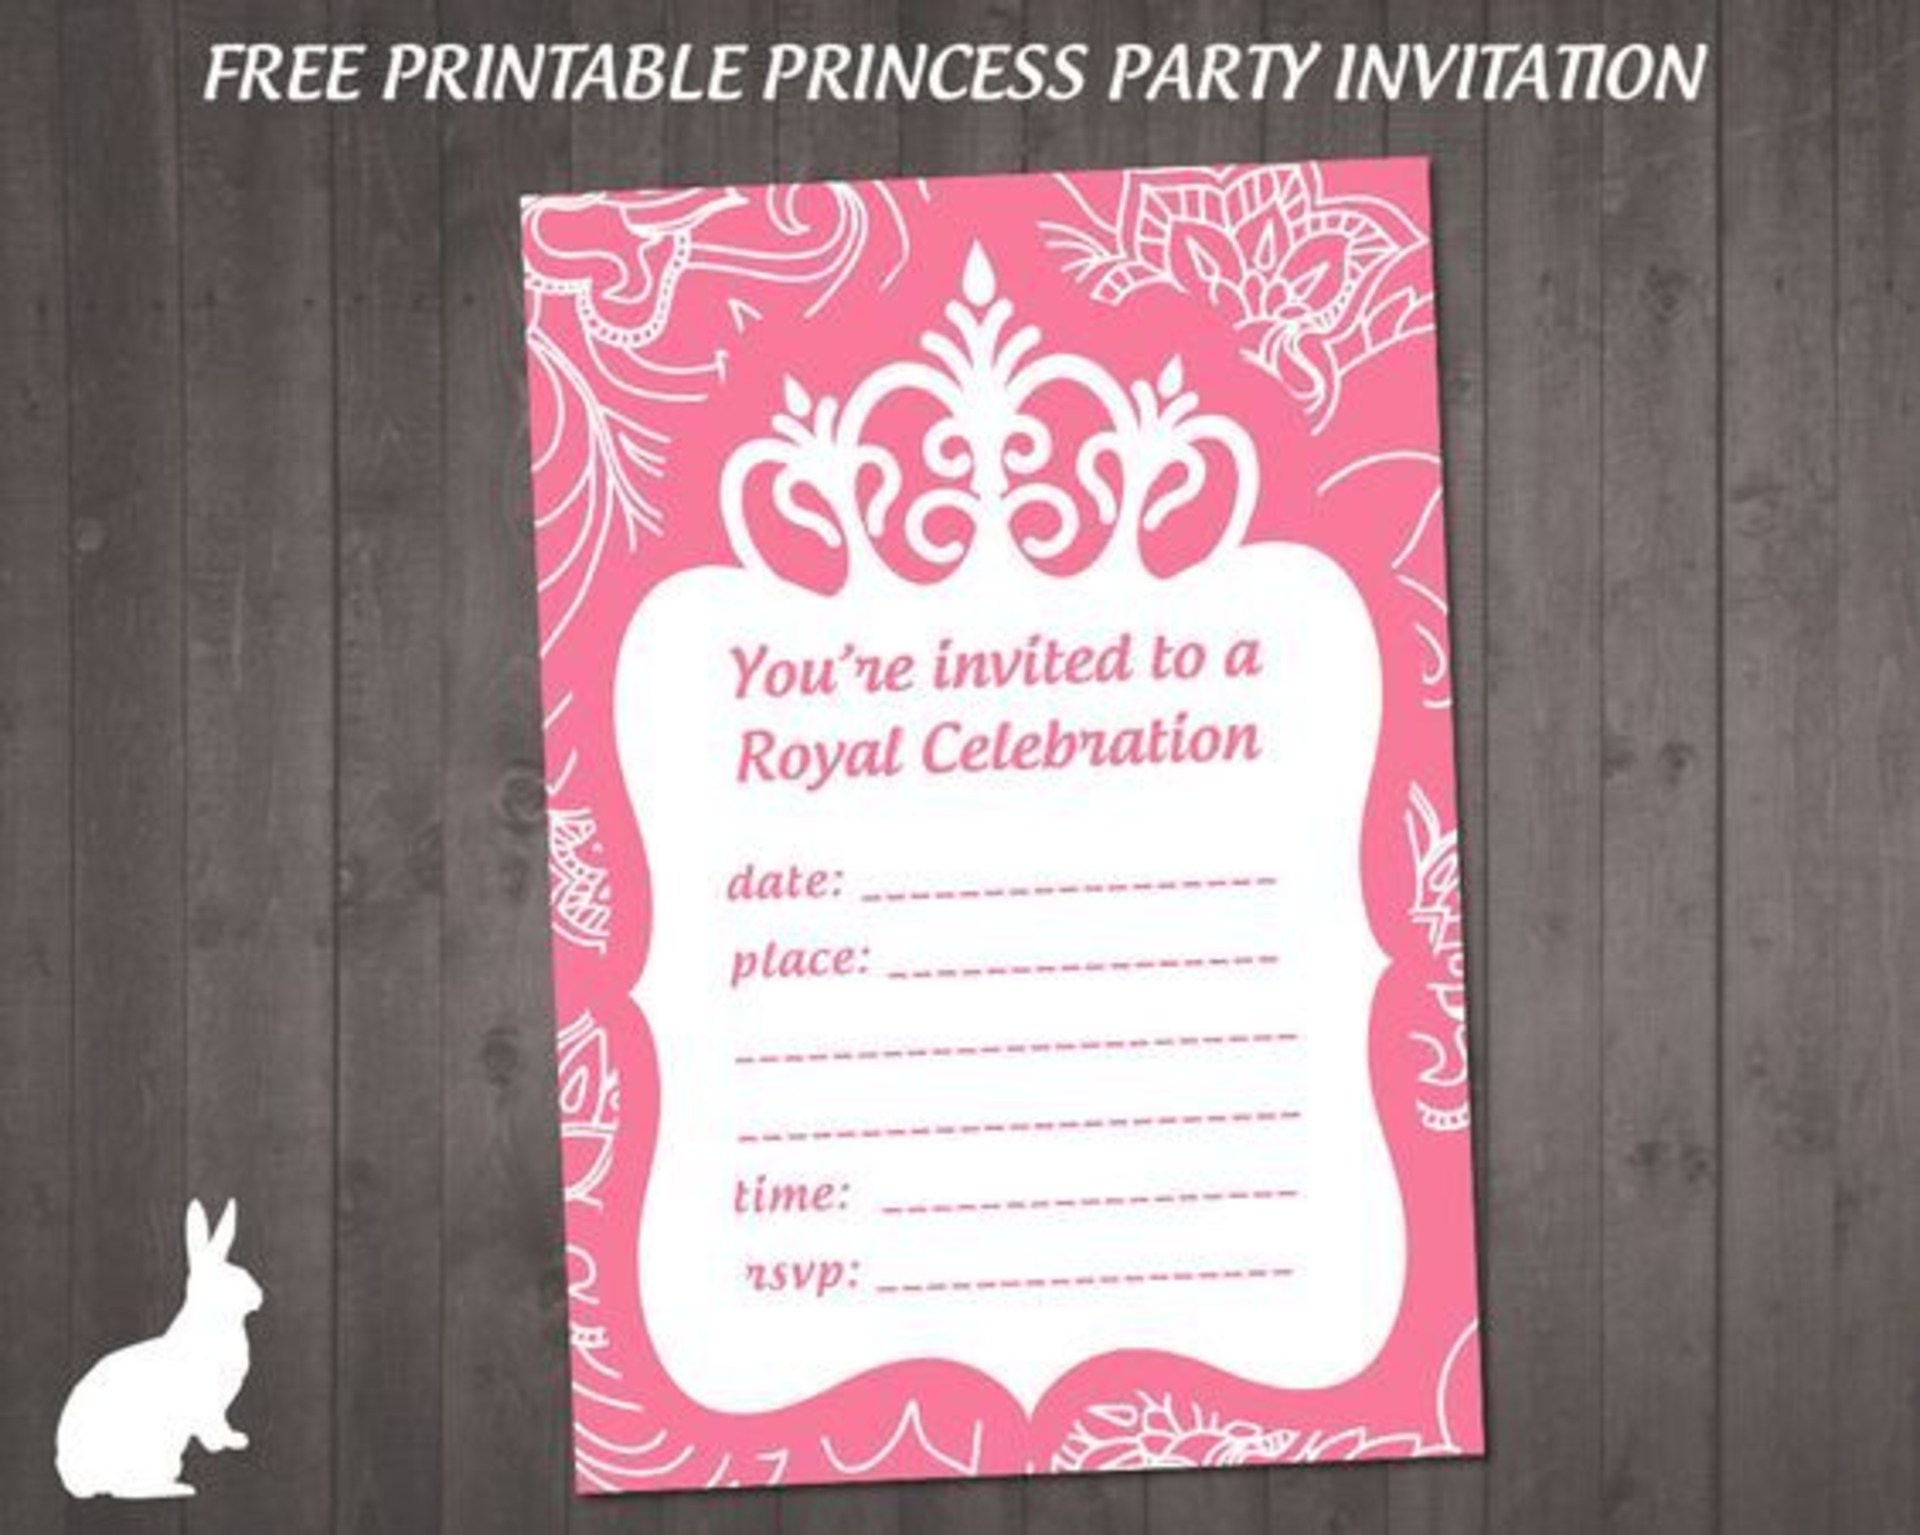 Ff083 Free Princess Party Invitation | Ruby And The Rabbit - Free Printable Princess Invitations